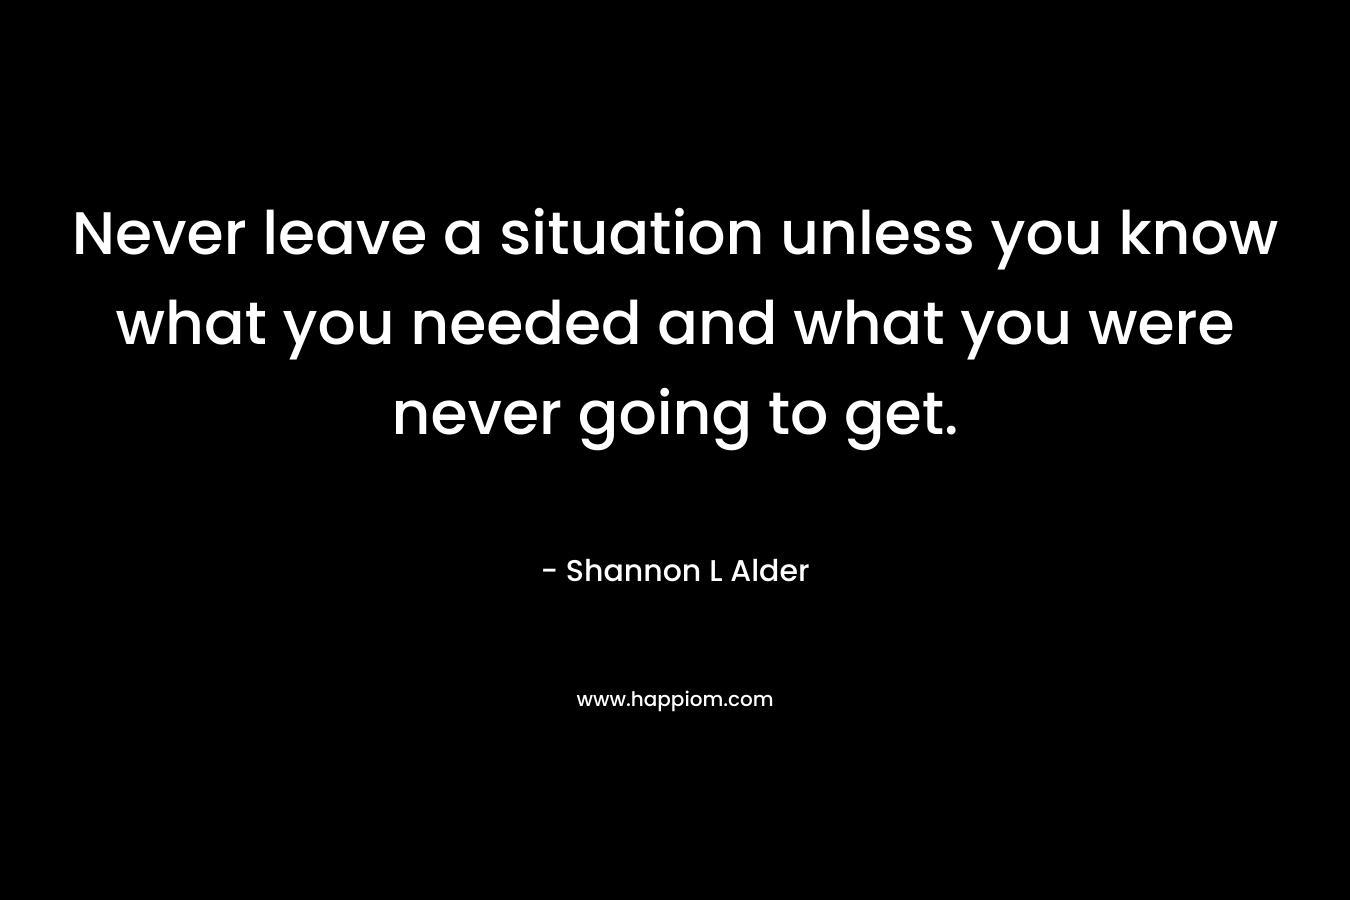 Never leave a situation unless you know what you needed and what you were never going to get.